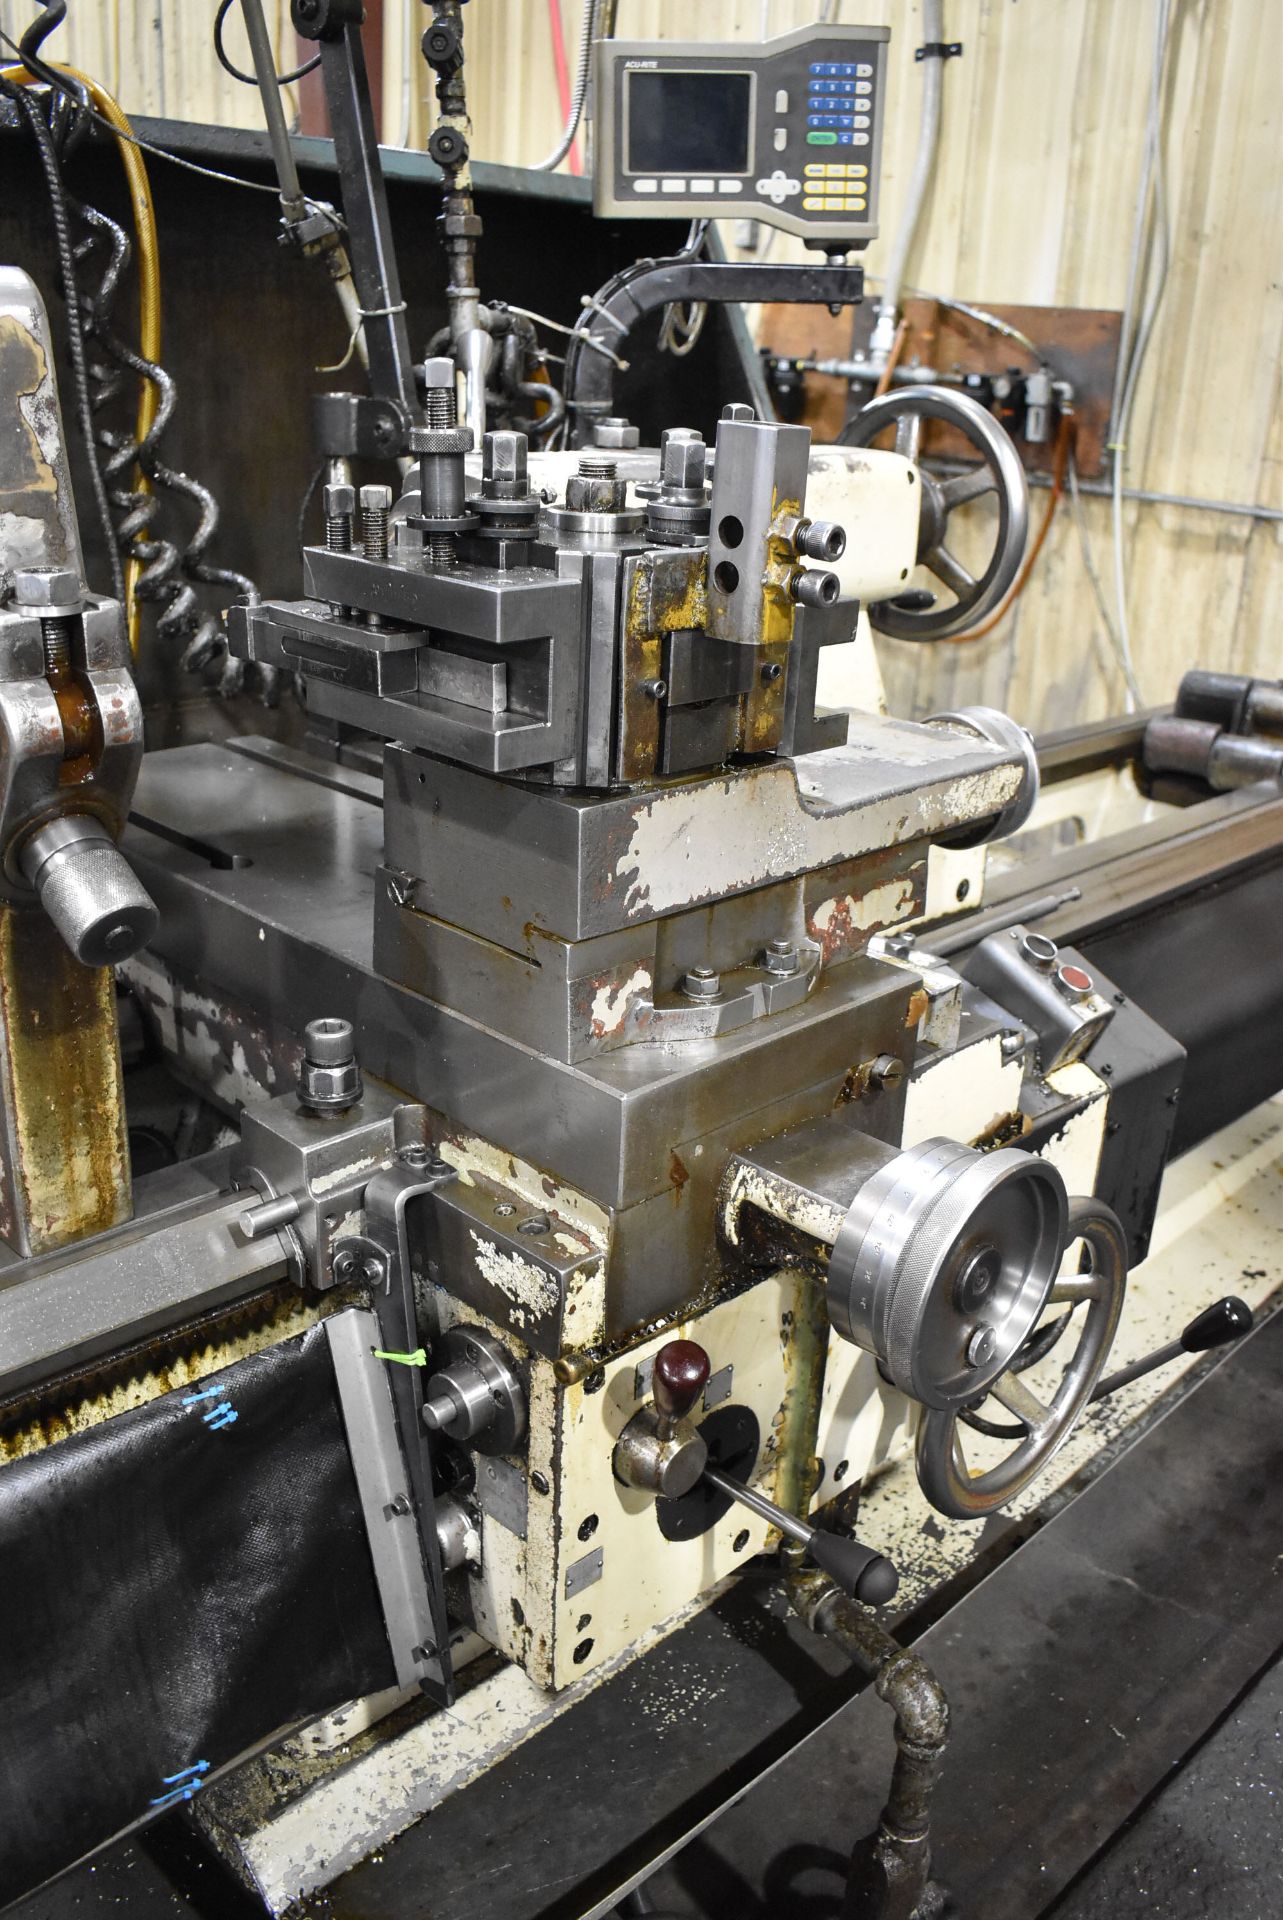 TOS SN 71 C GAP BED ENGINE LATHE WITH 30" SWING, 120" BETWEEN CENTERS, 3" SPINDLE BORE, SPEEDS TO - Image 3 of 18